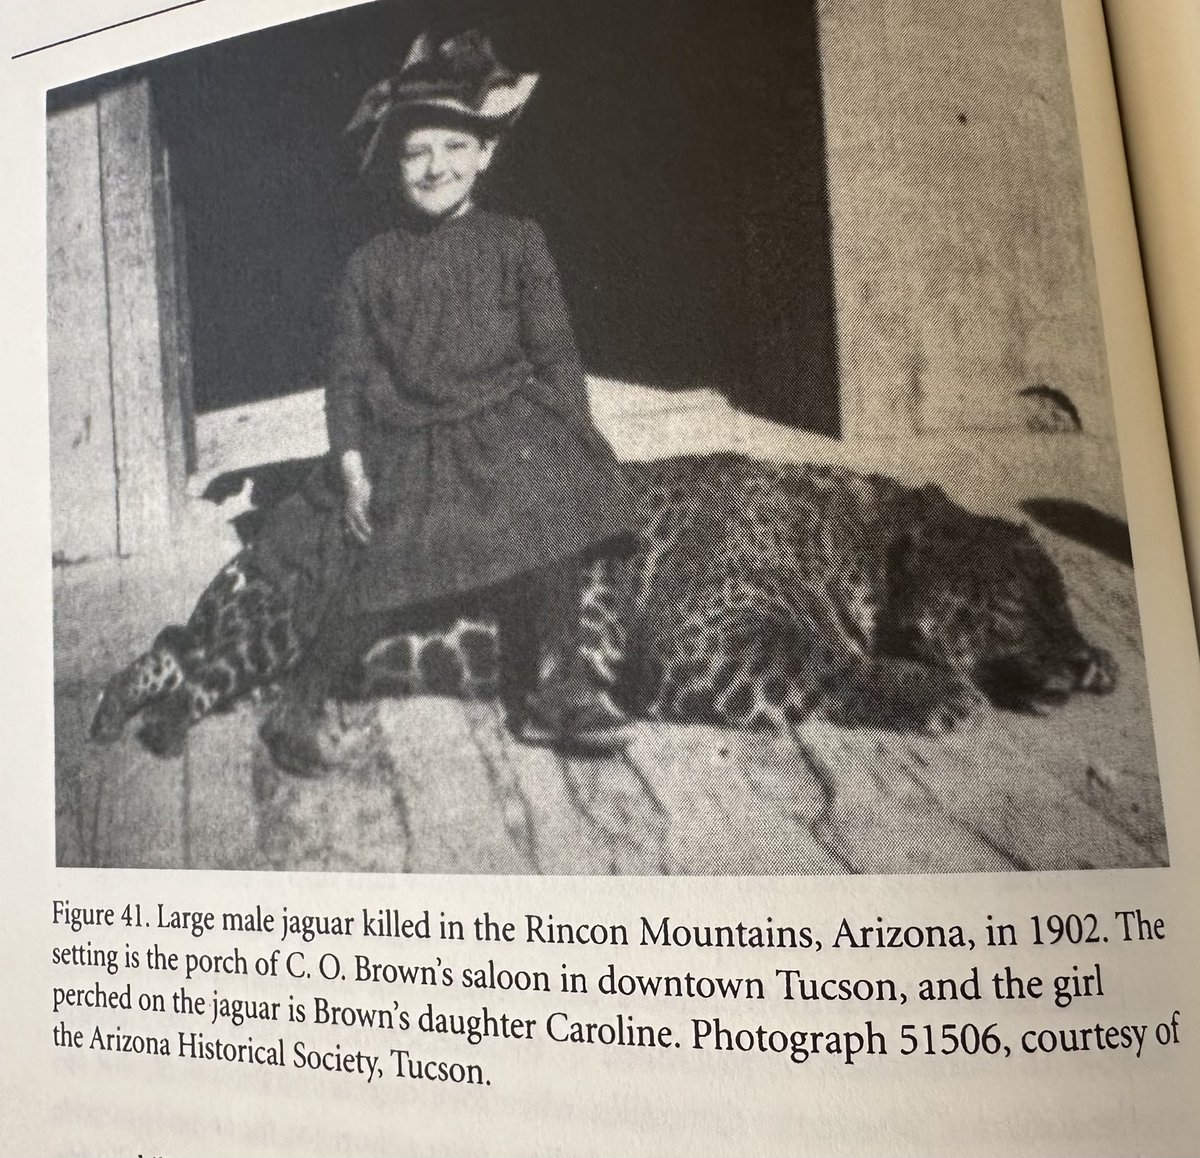 Large male jaguar killed in the Rincon Mountains, Arizona, in 1902. The setting is the porch of C. O. Brown's saloon in downtown Tucson, and the girl perched on the jaguar is Brown's daughter Caroline.